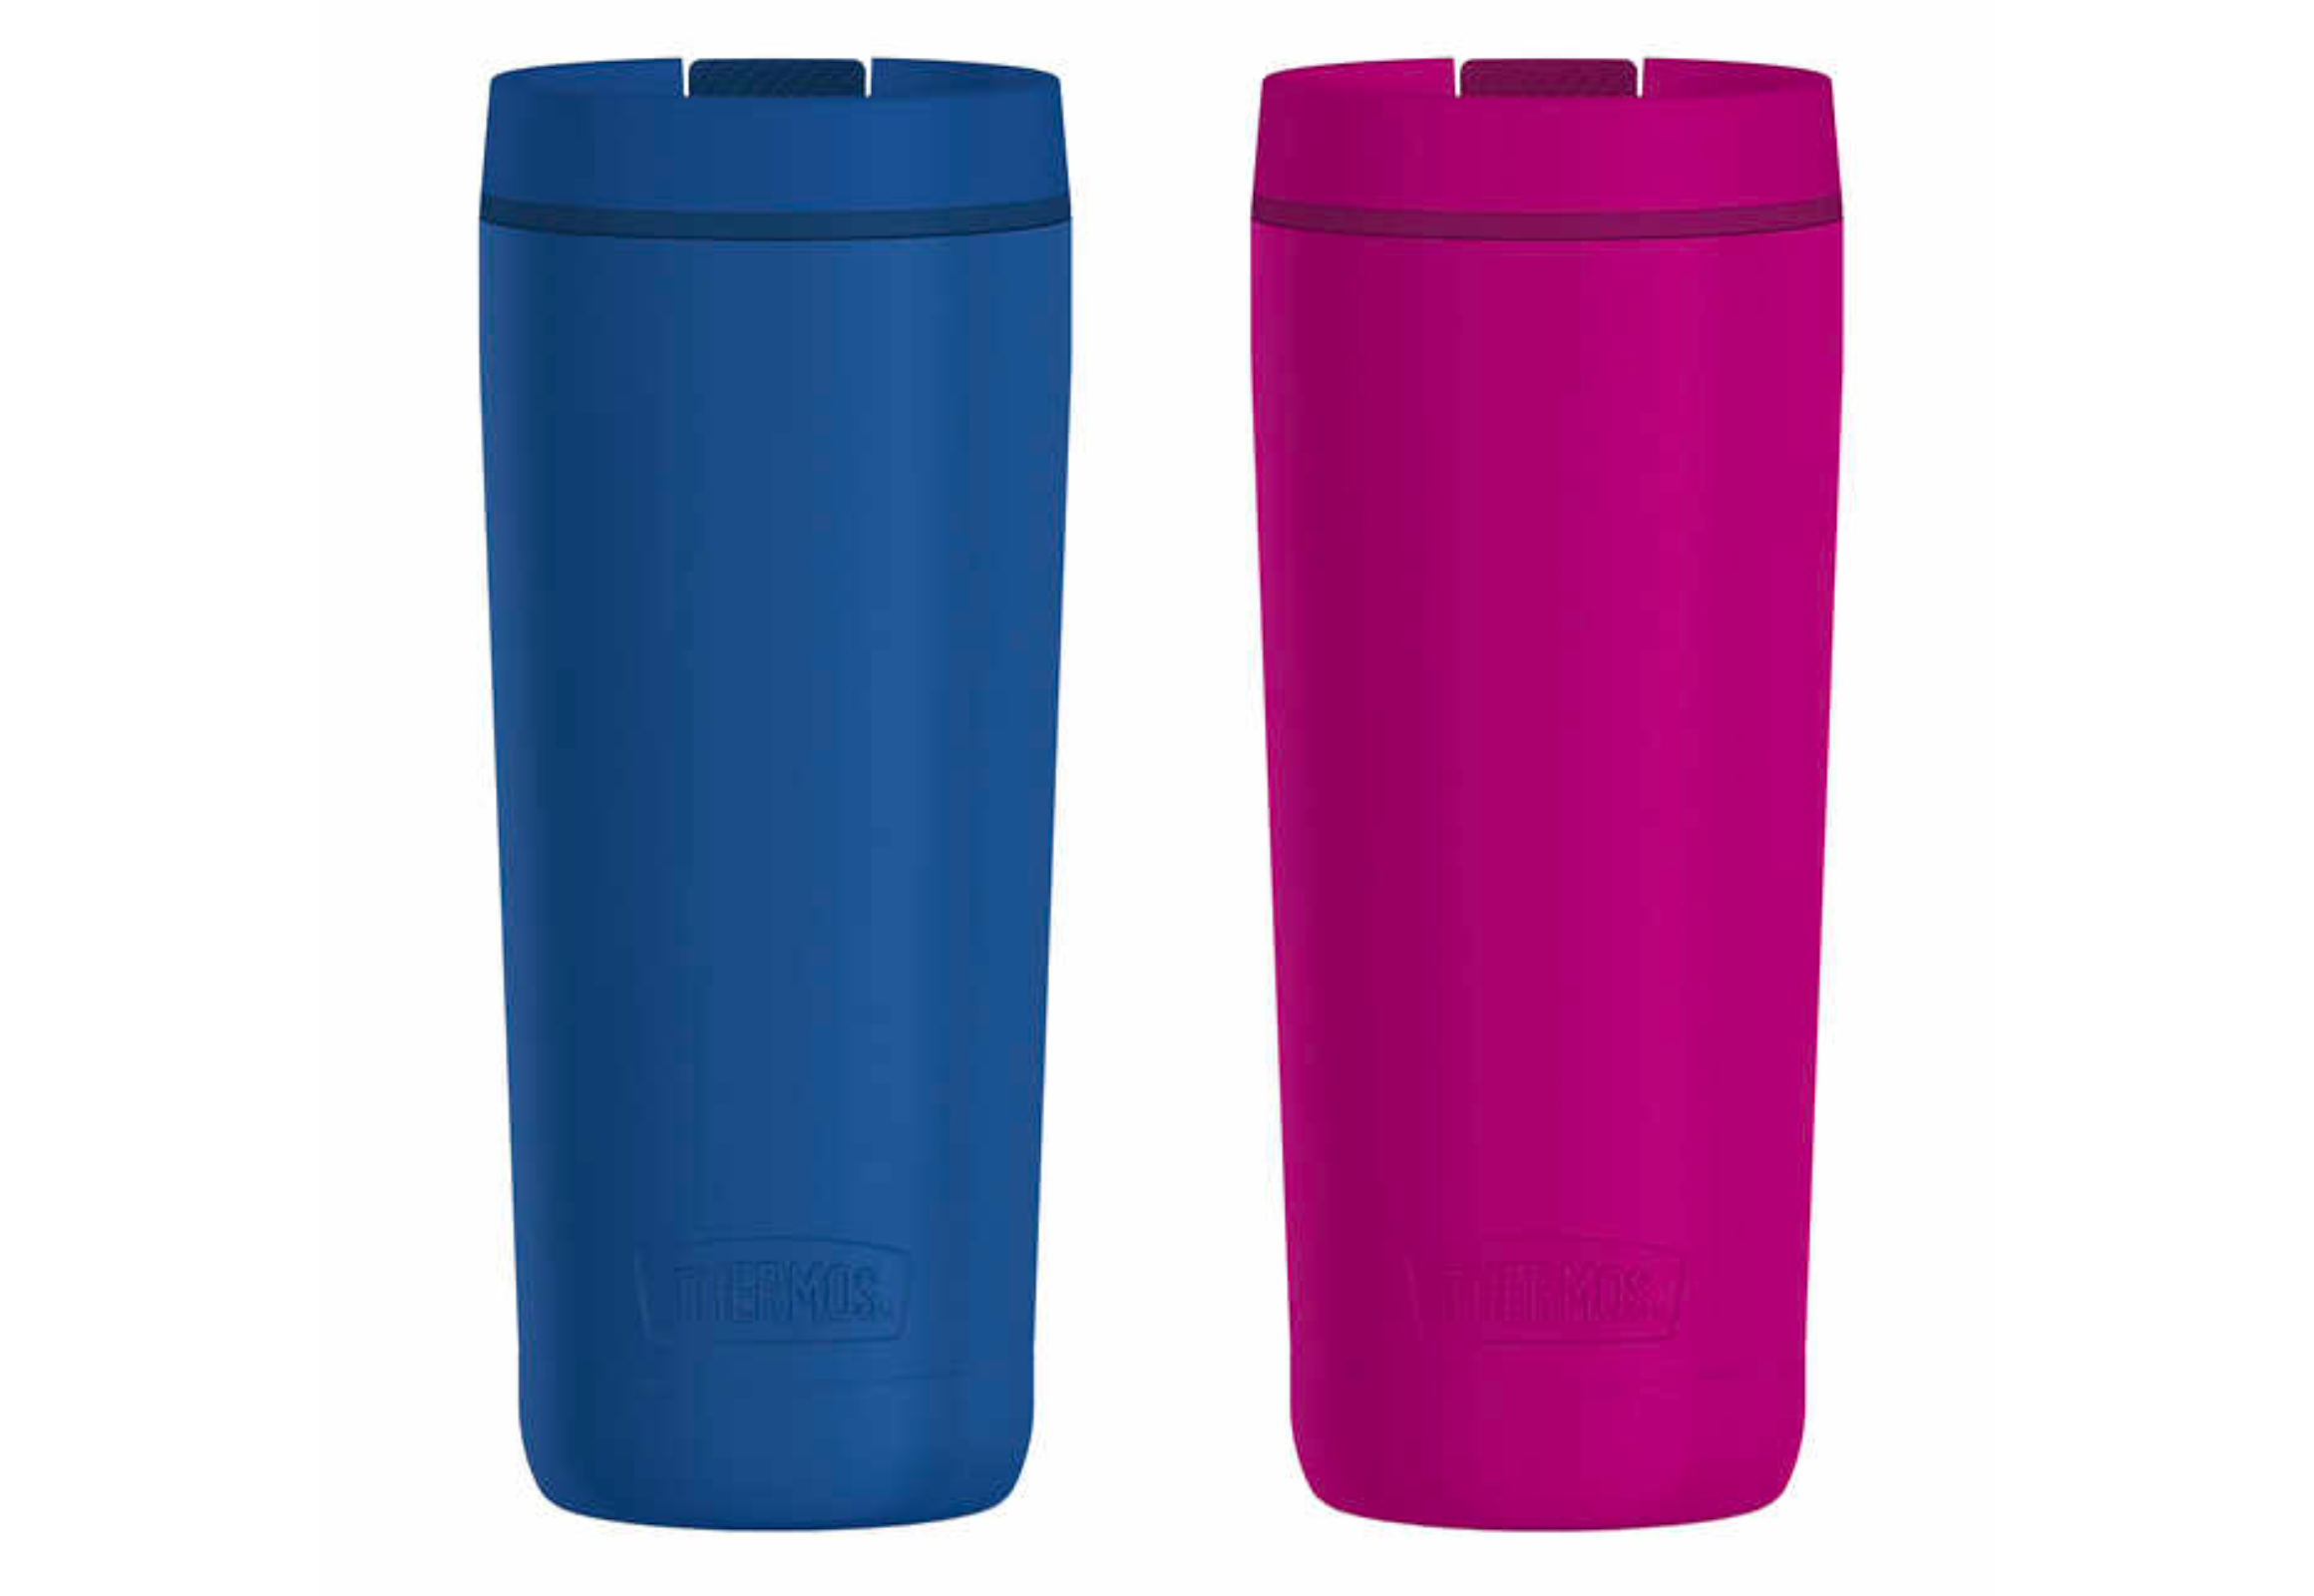 Stainless Steel Thermos Tumbler 2-Pack Only $11.97 Shipped on Costco.com